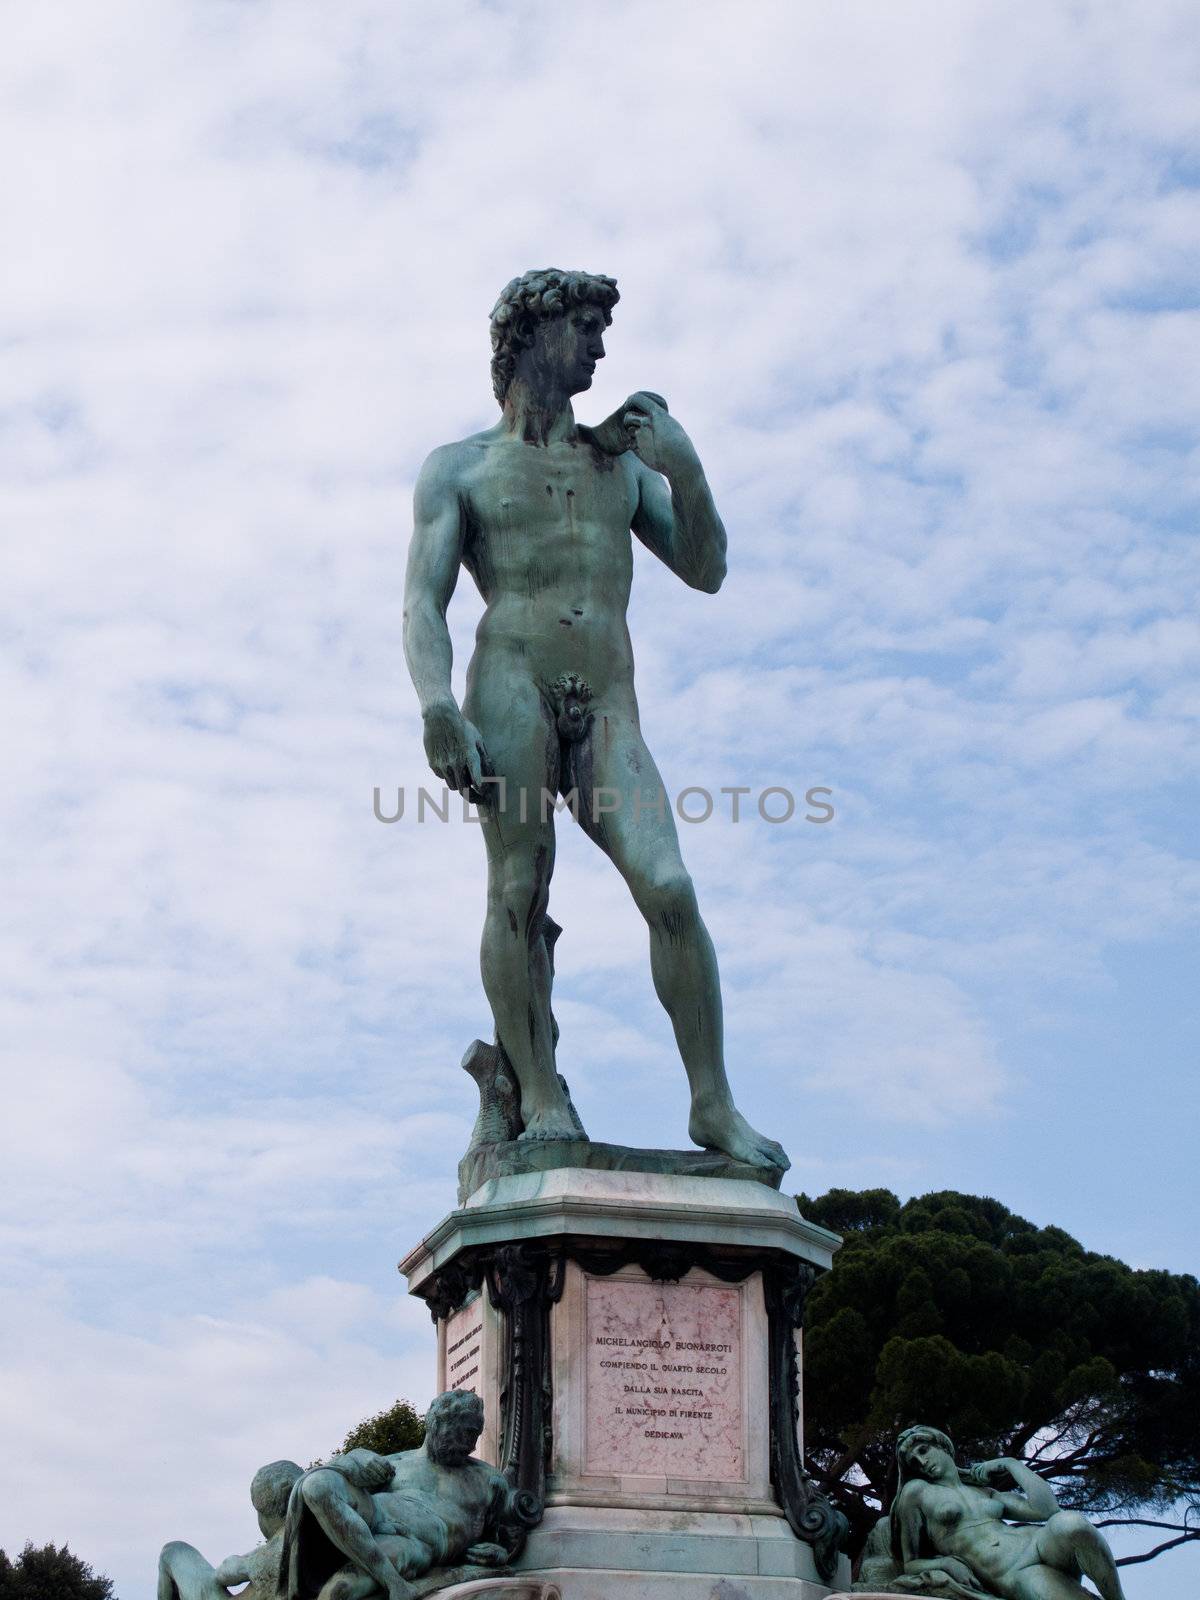 Statue of David by steheap